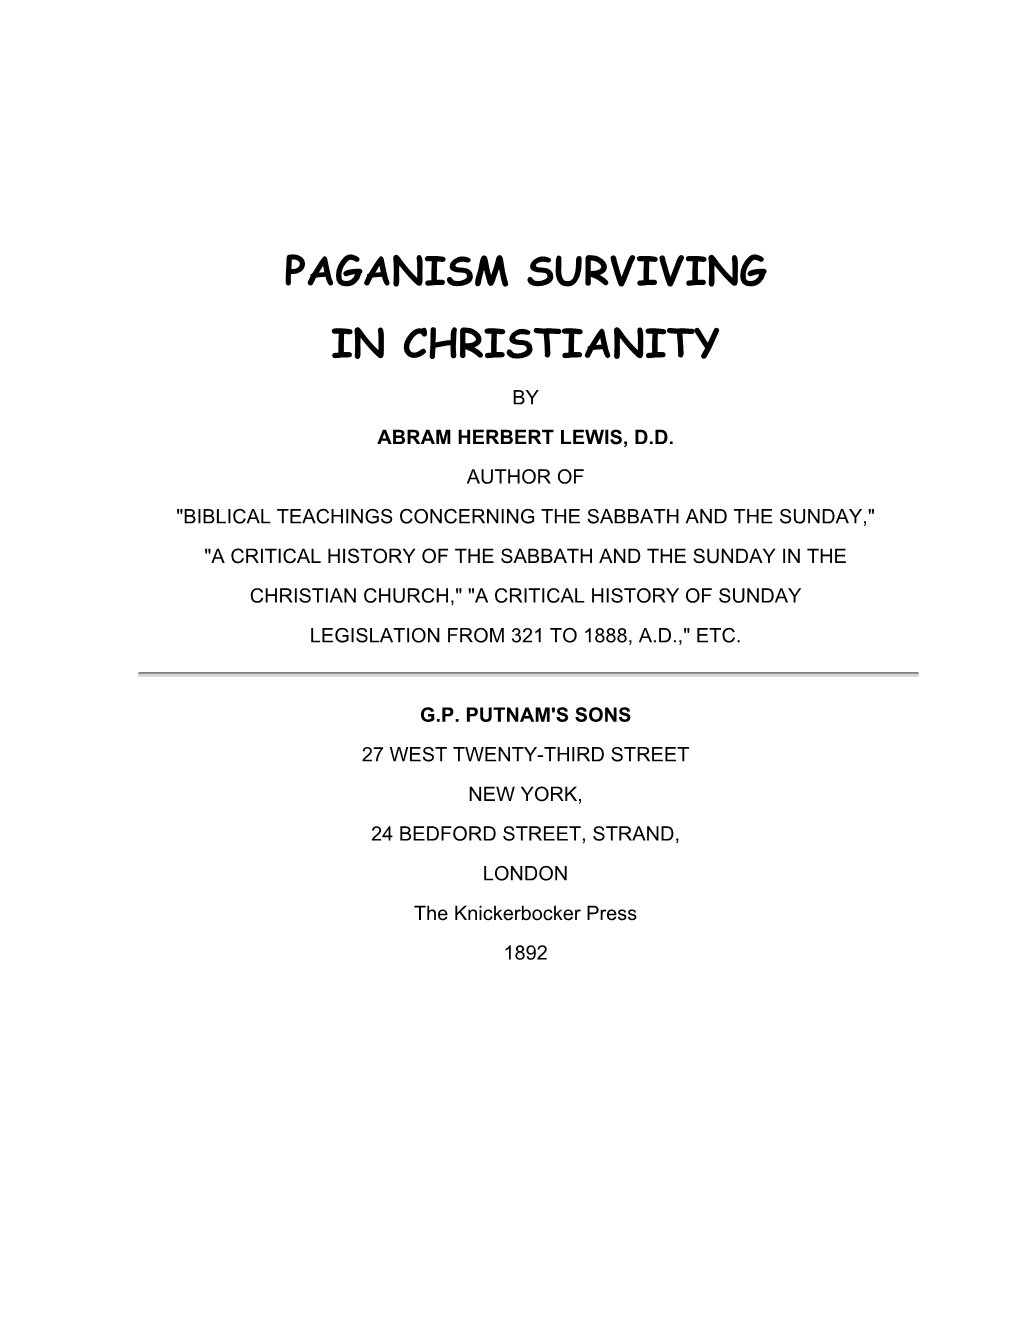 Paganism Surviving in Christianity PART II